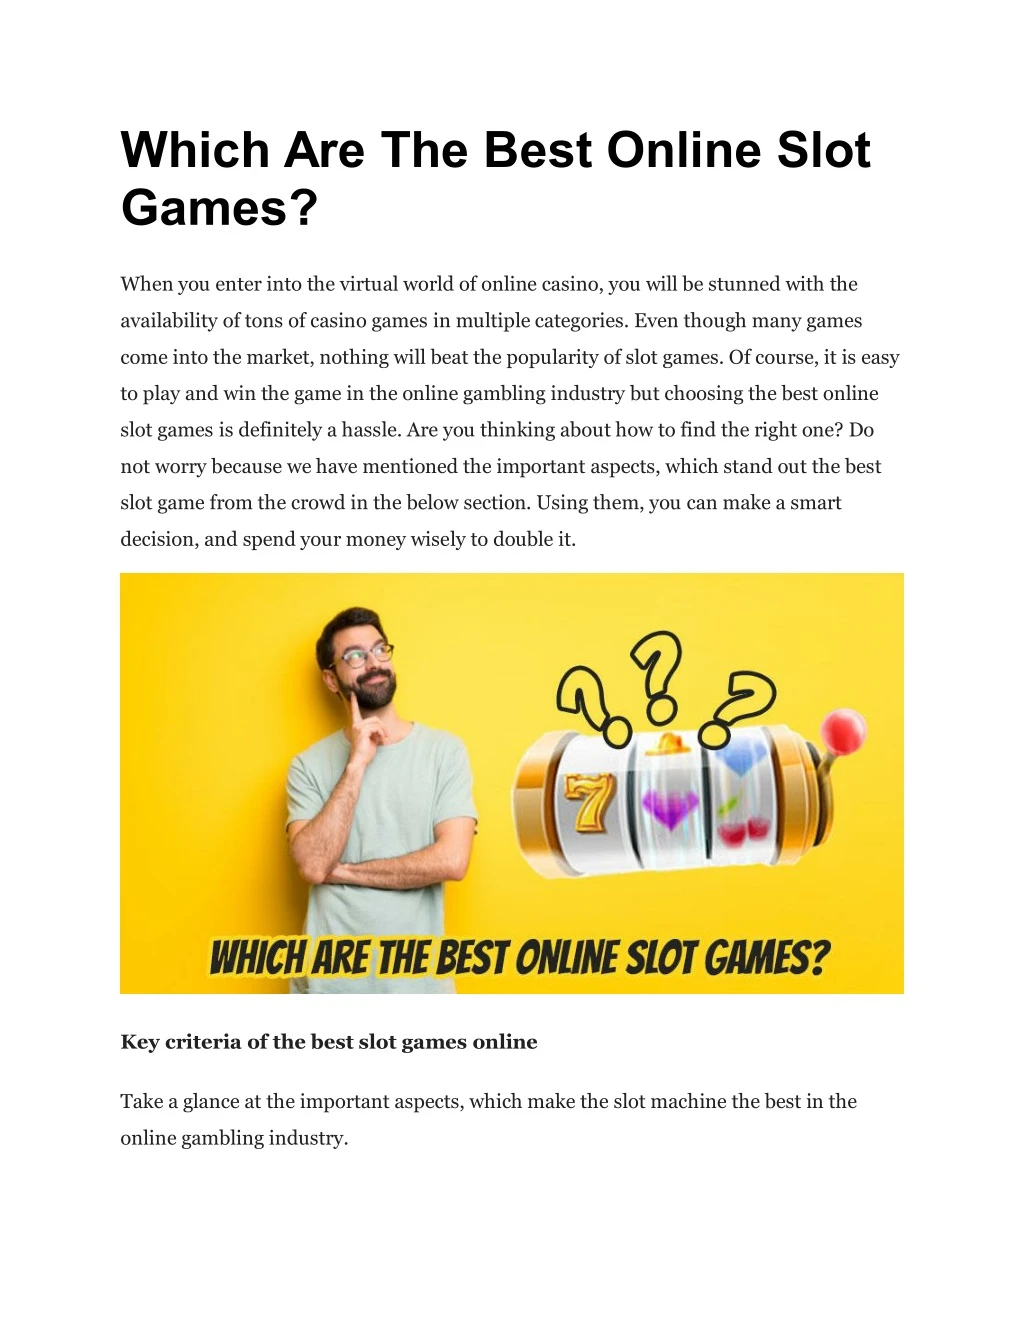 which are the best online slot games